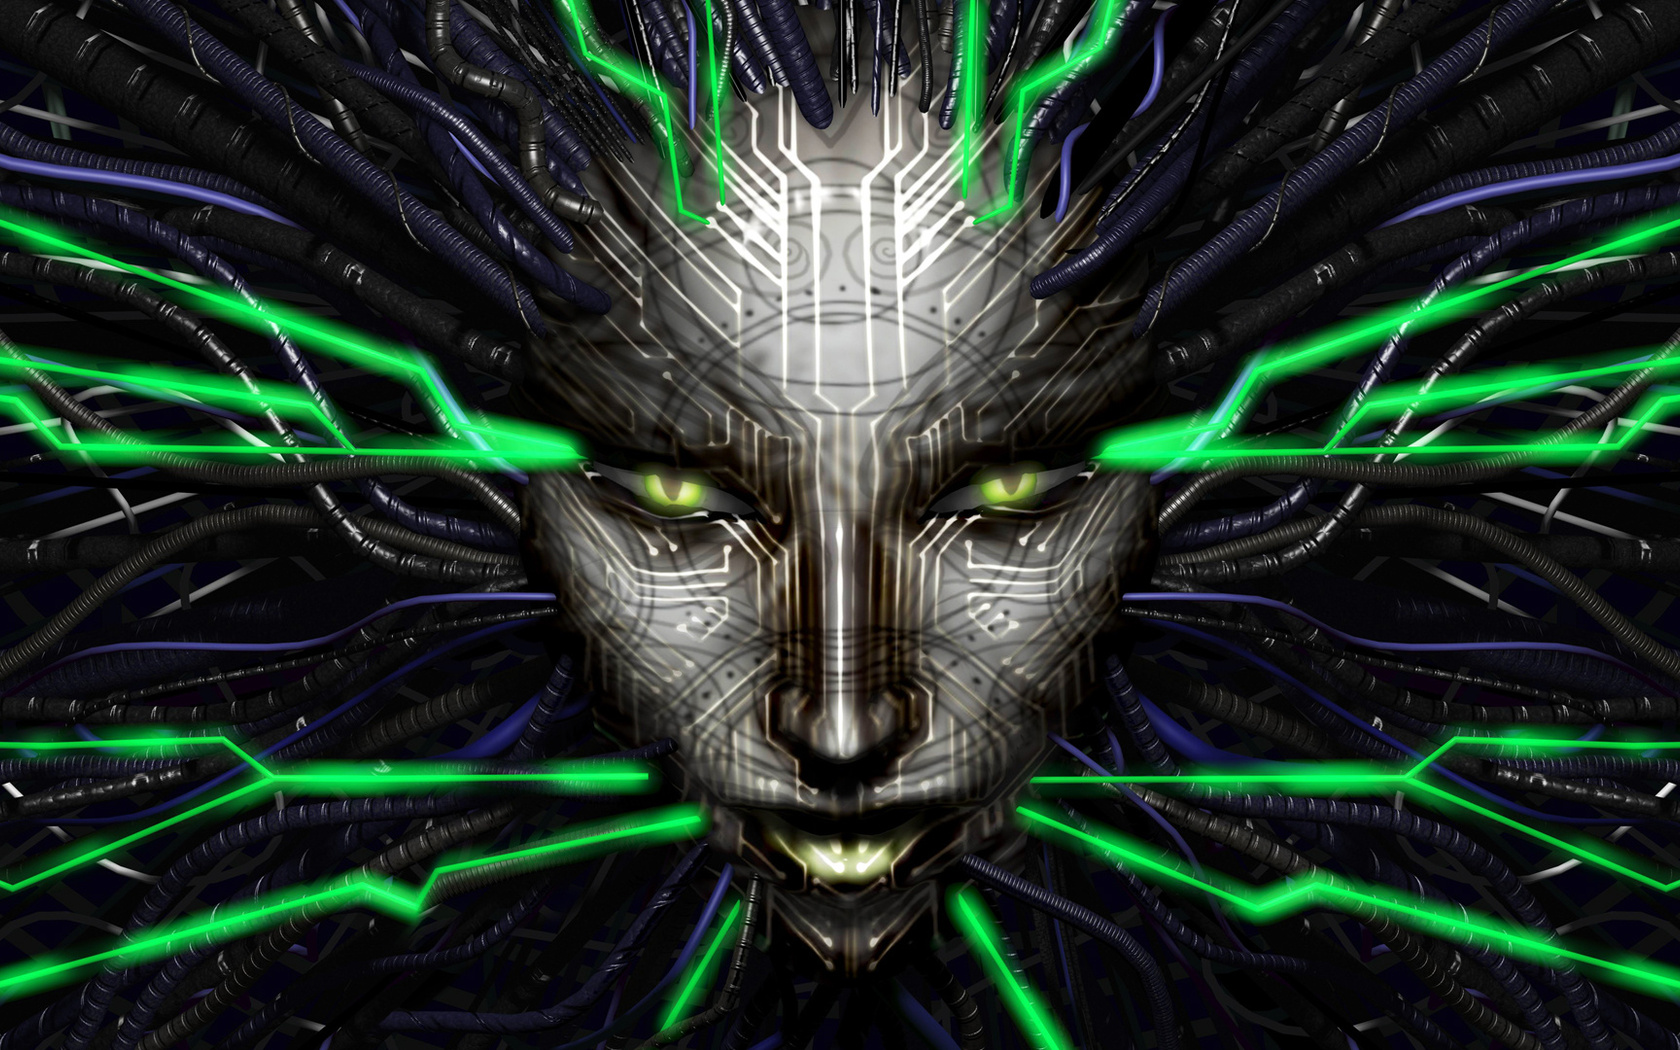 After Protracted Legal Battle System Shock Finally Available Ars